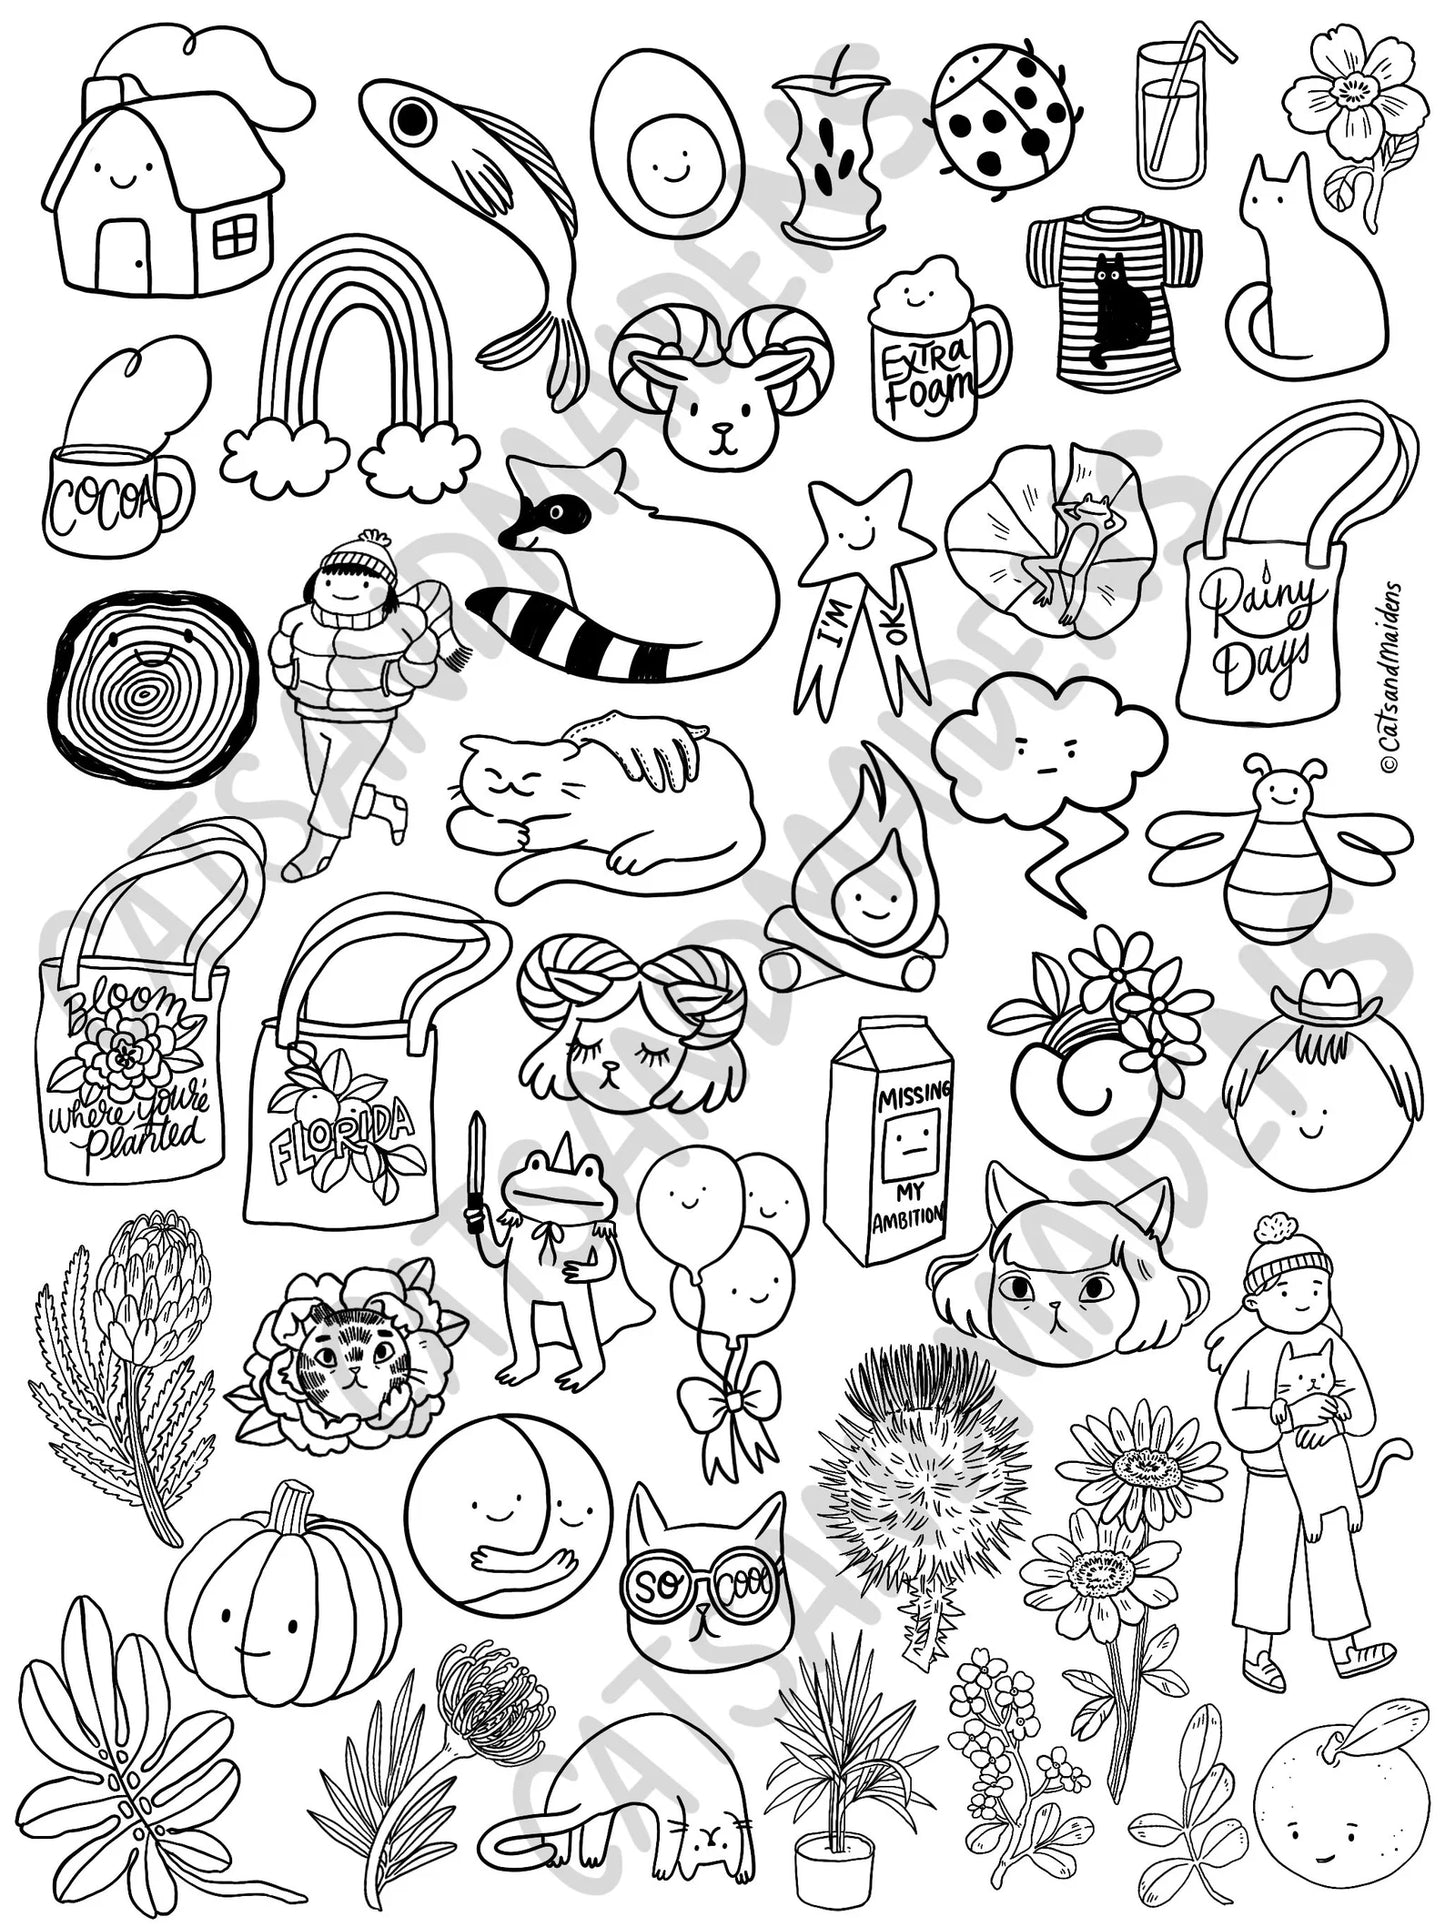 Downloadable Coloring Page